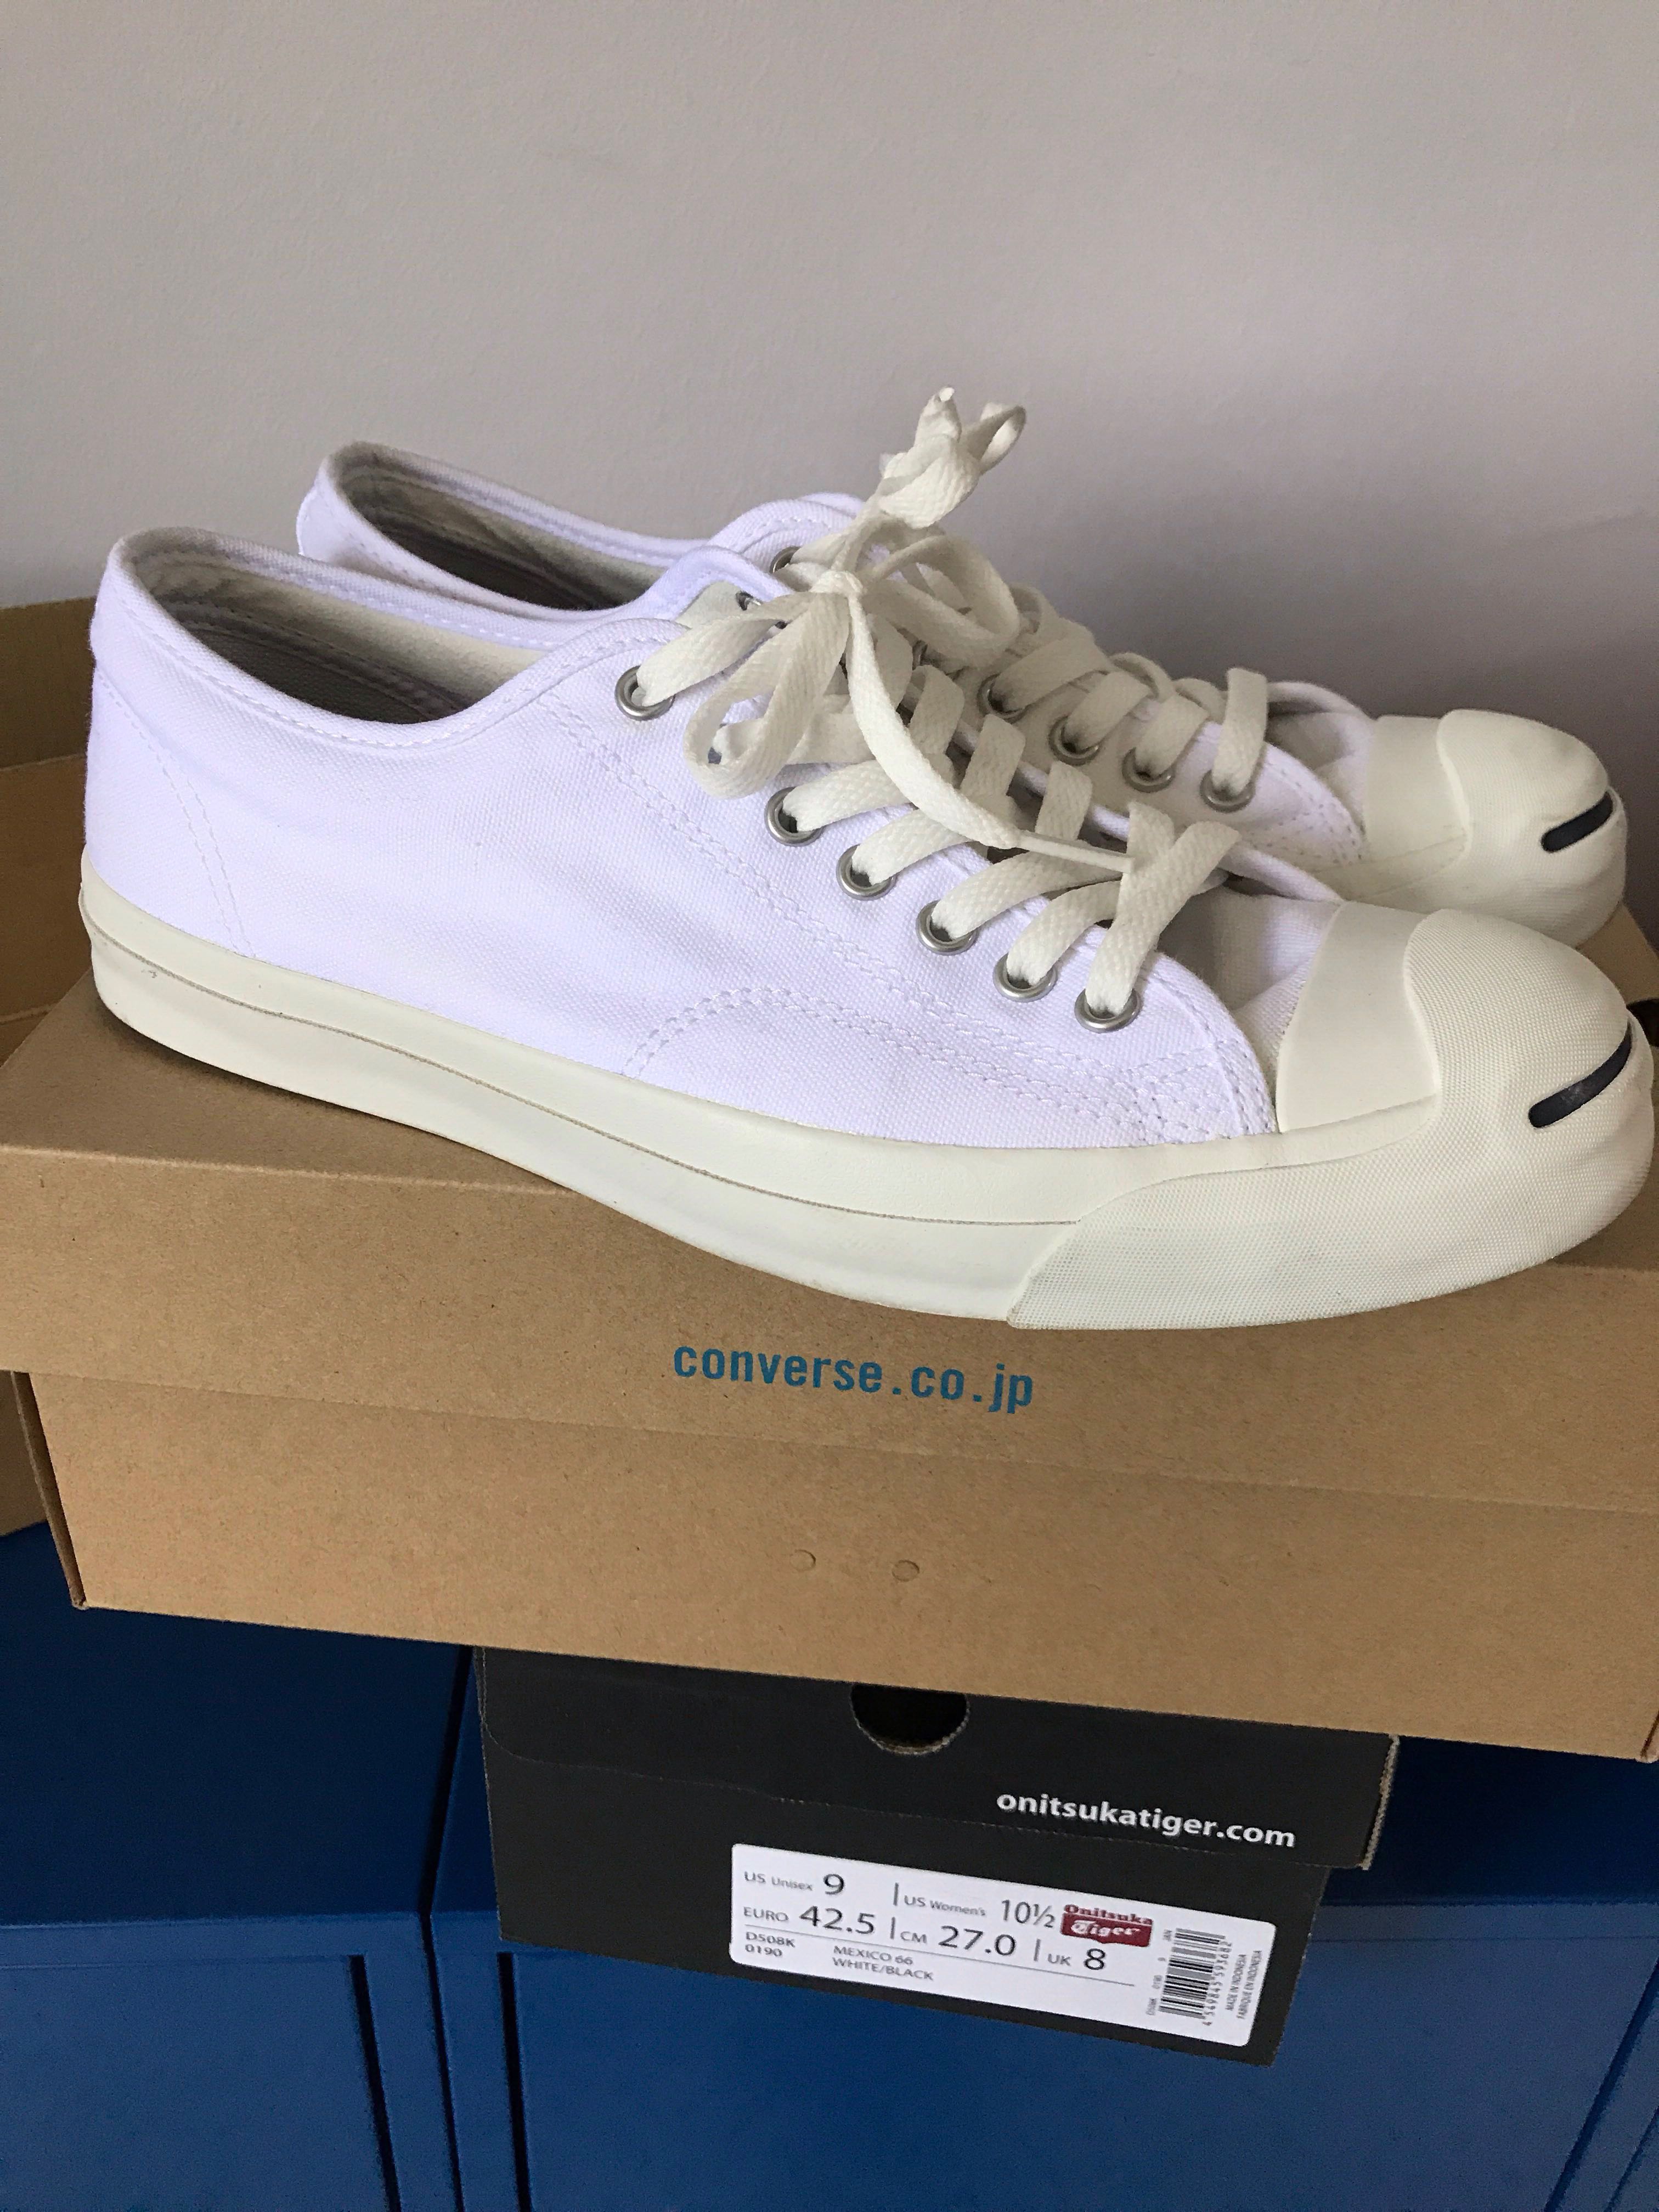 converse jack purcell mexico